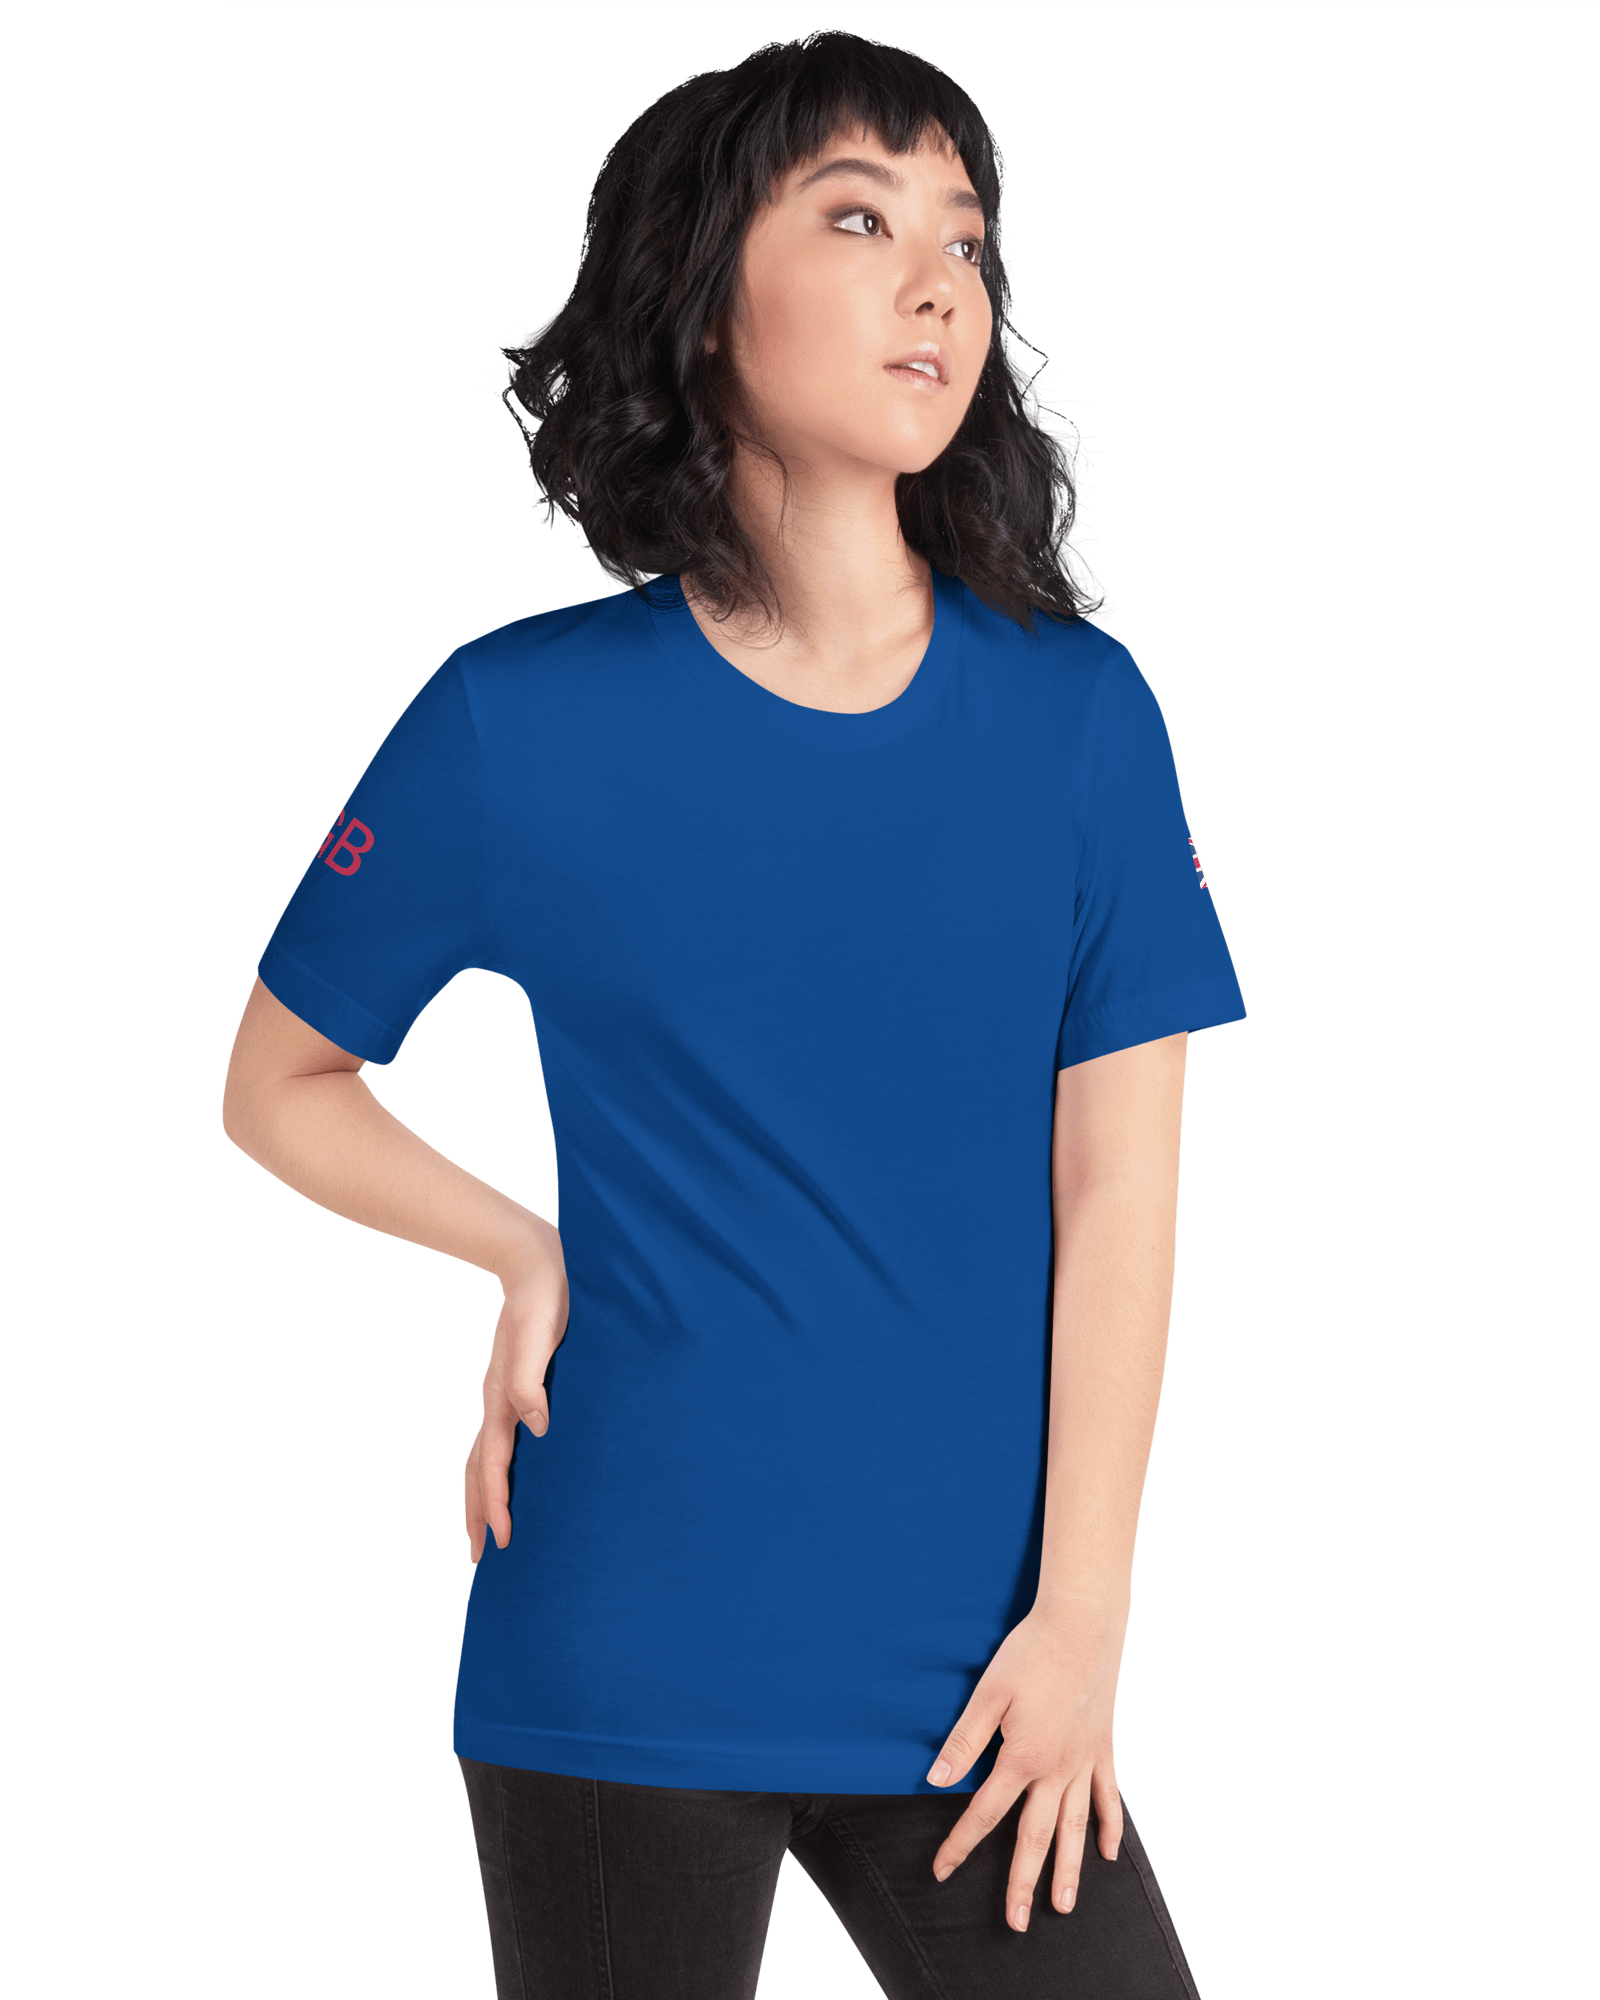 Union Jack GB T-shirt | Both Sleeves | Unisex Fit Shirts & Tops Jolly & Goode